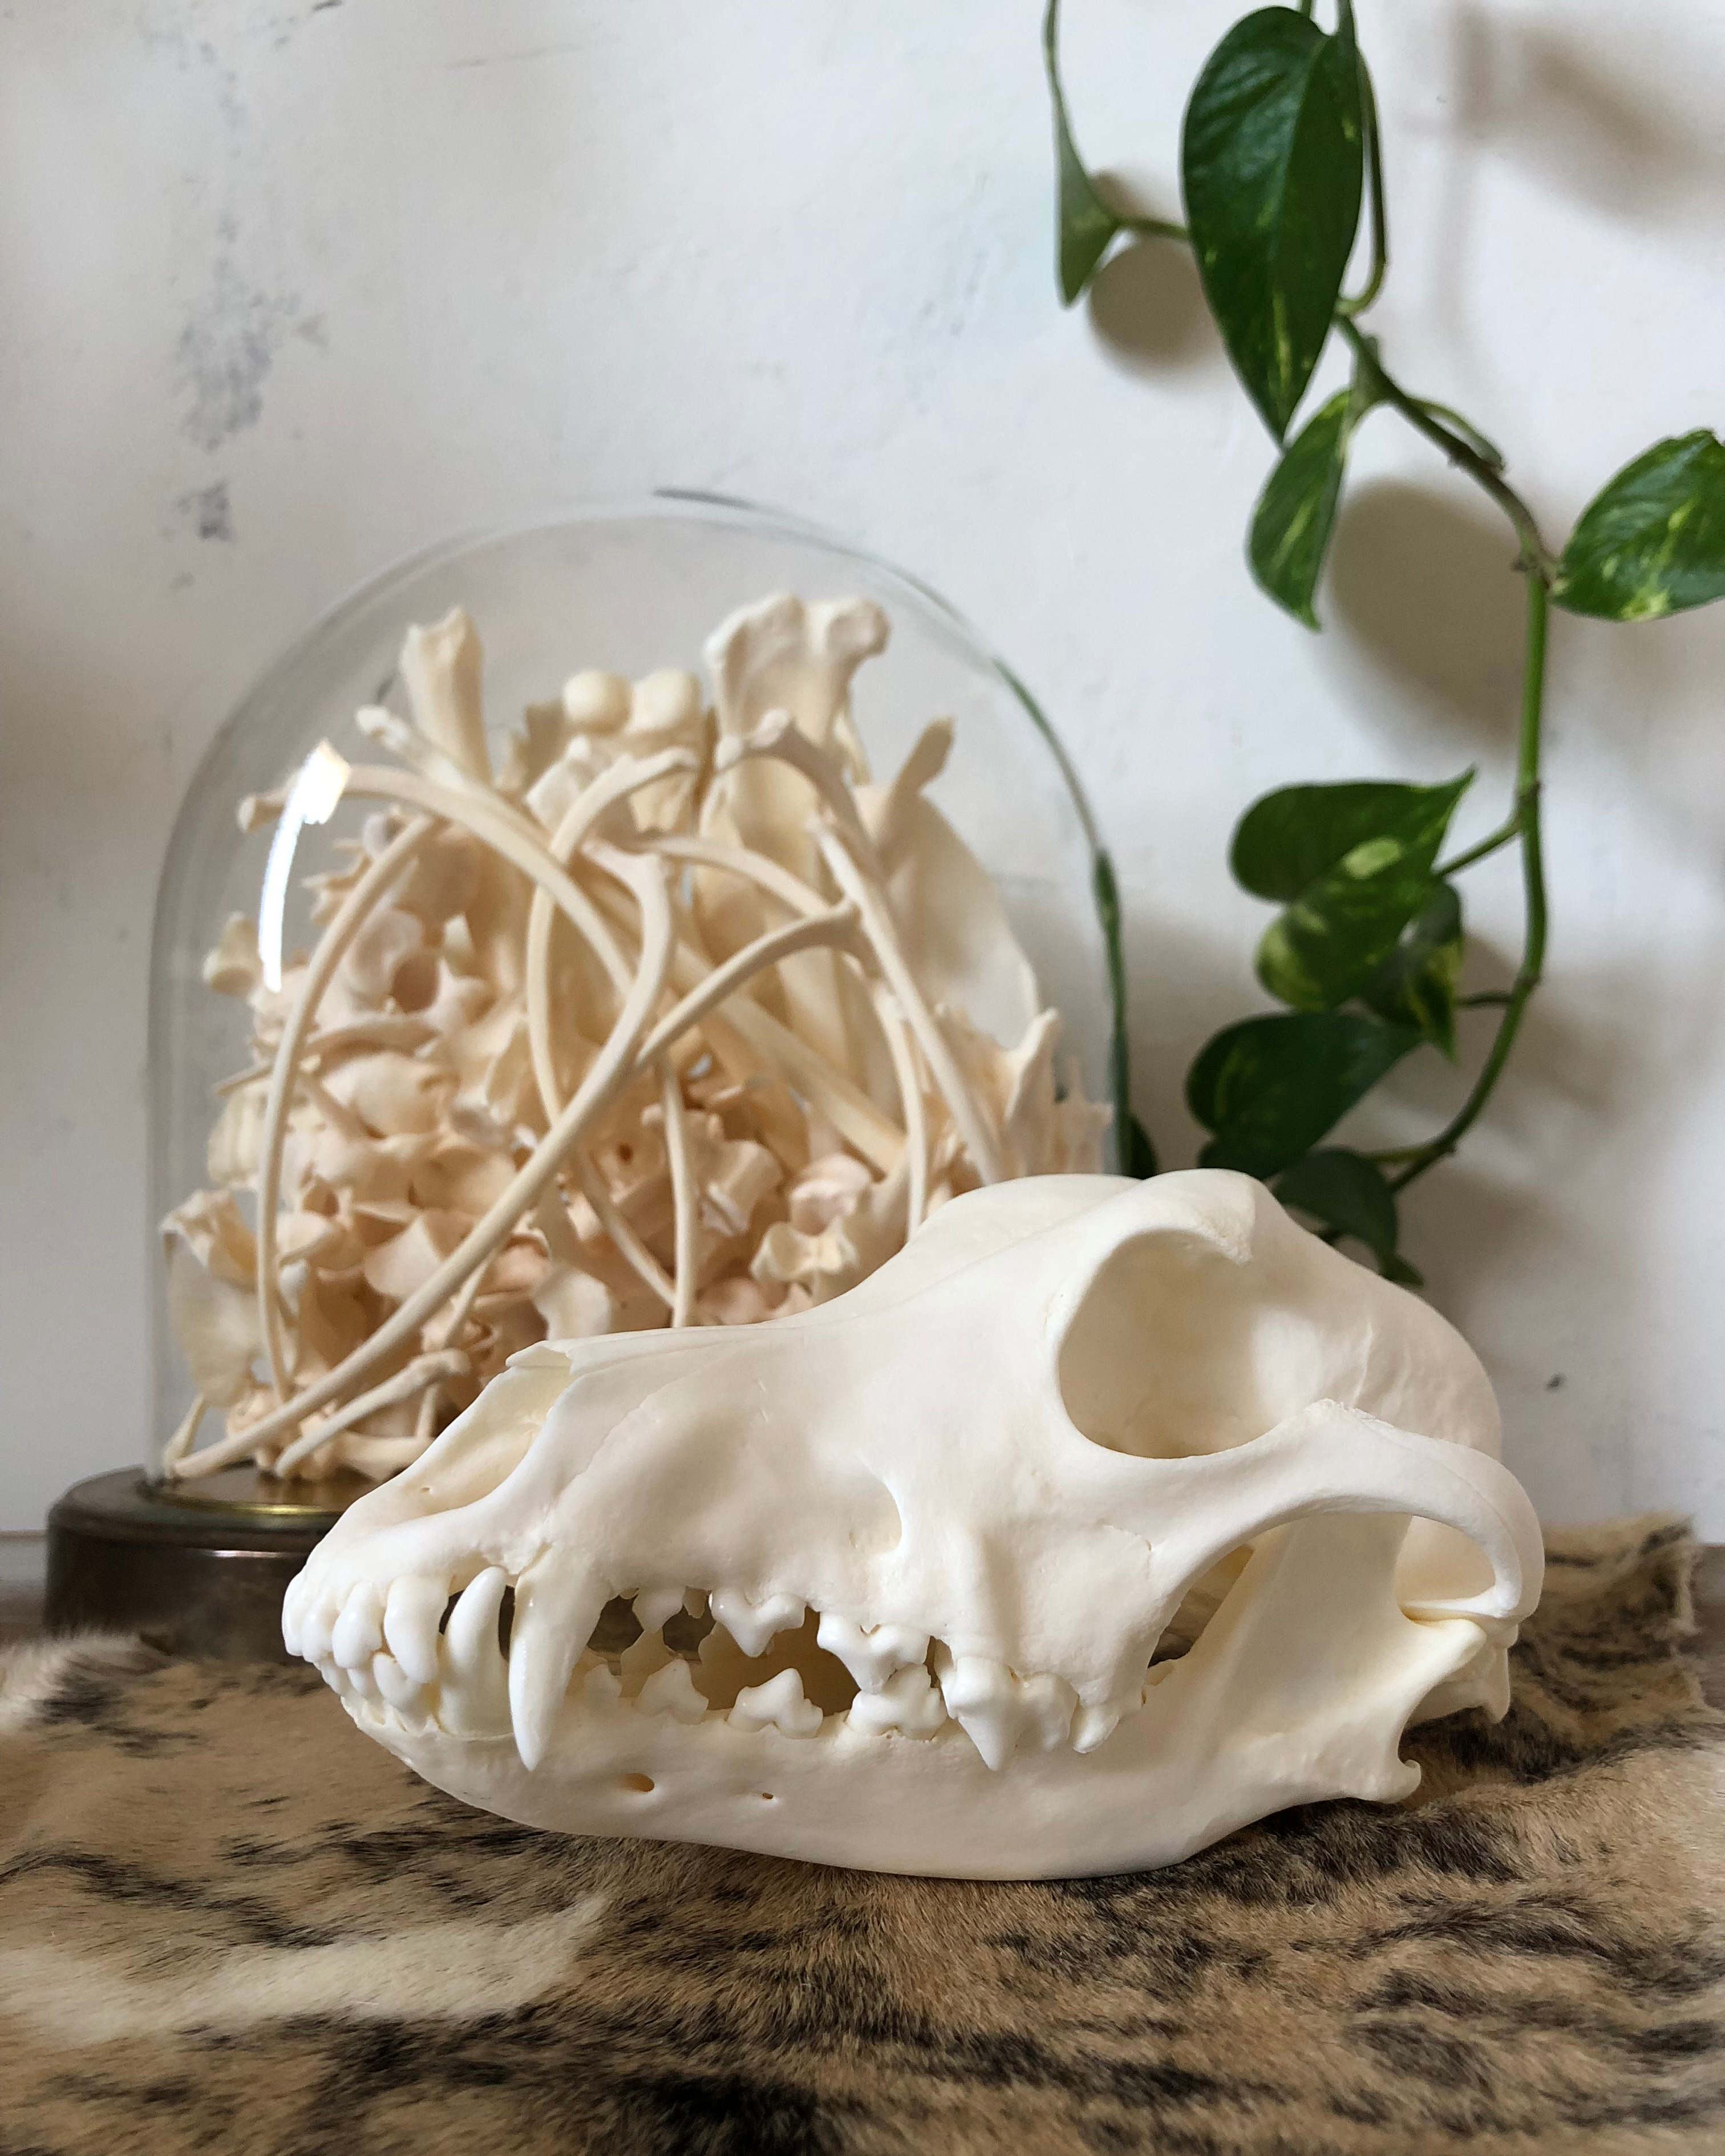 Dog's skull with a jar of bones and a plant in the background